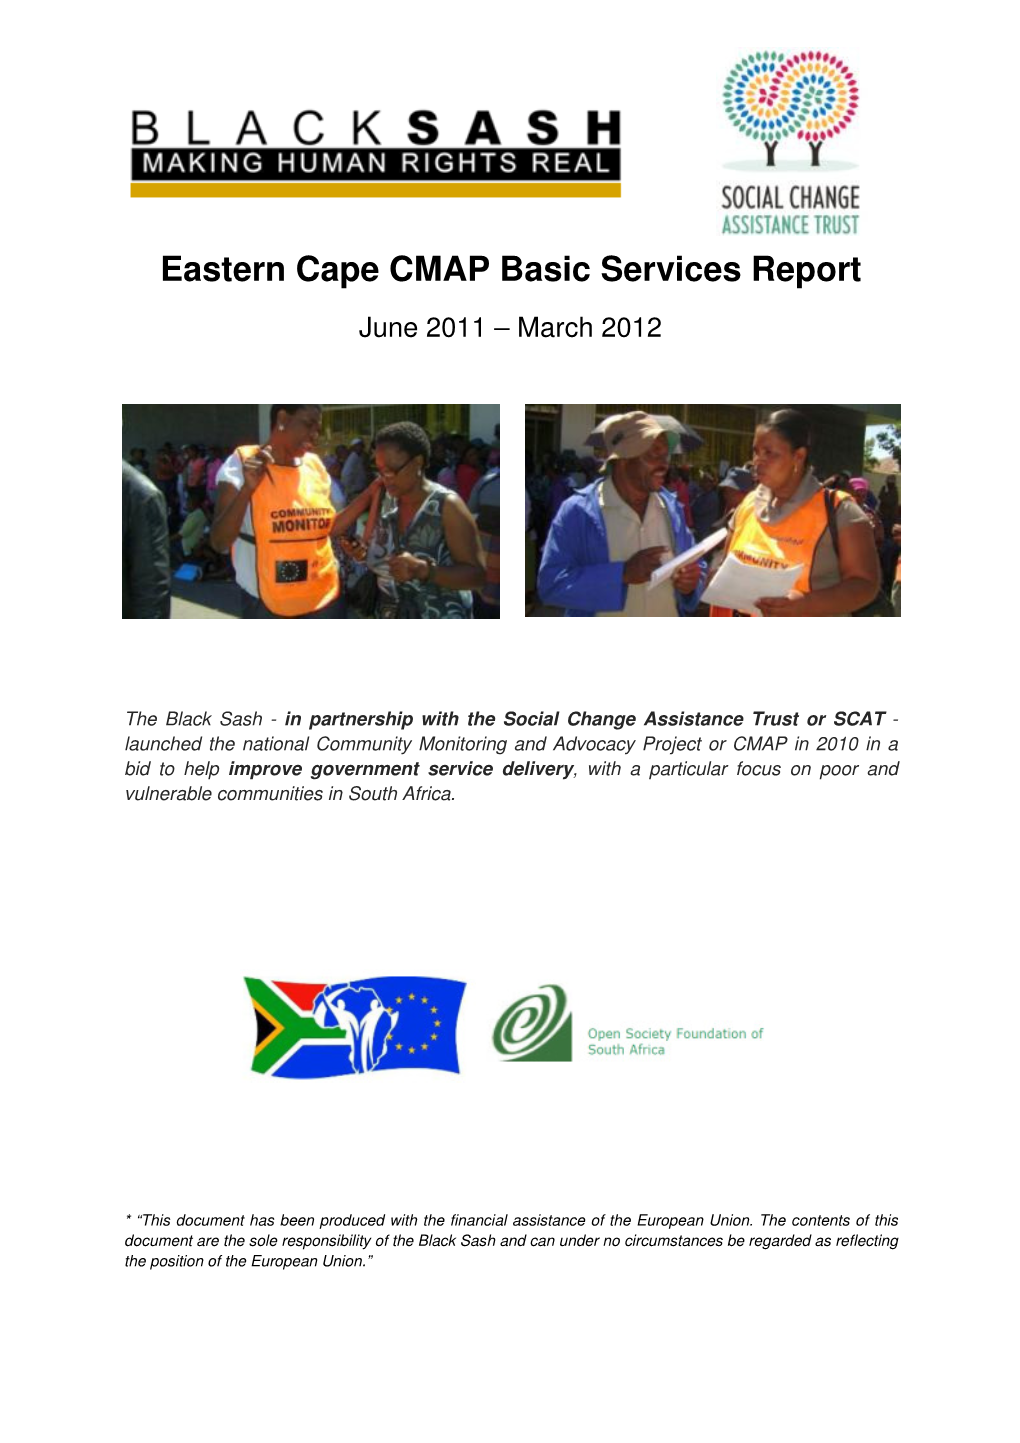 Eastern Cape CMAP Basic Services Report June 2011 – March 2012